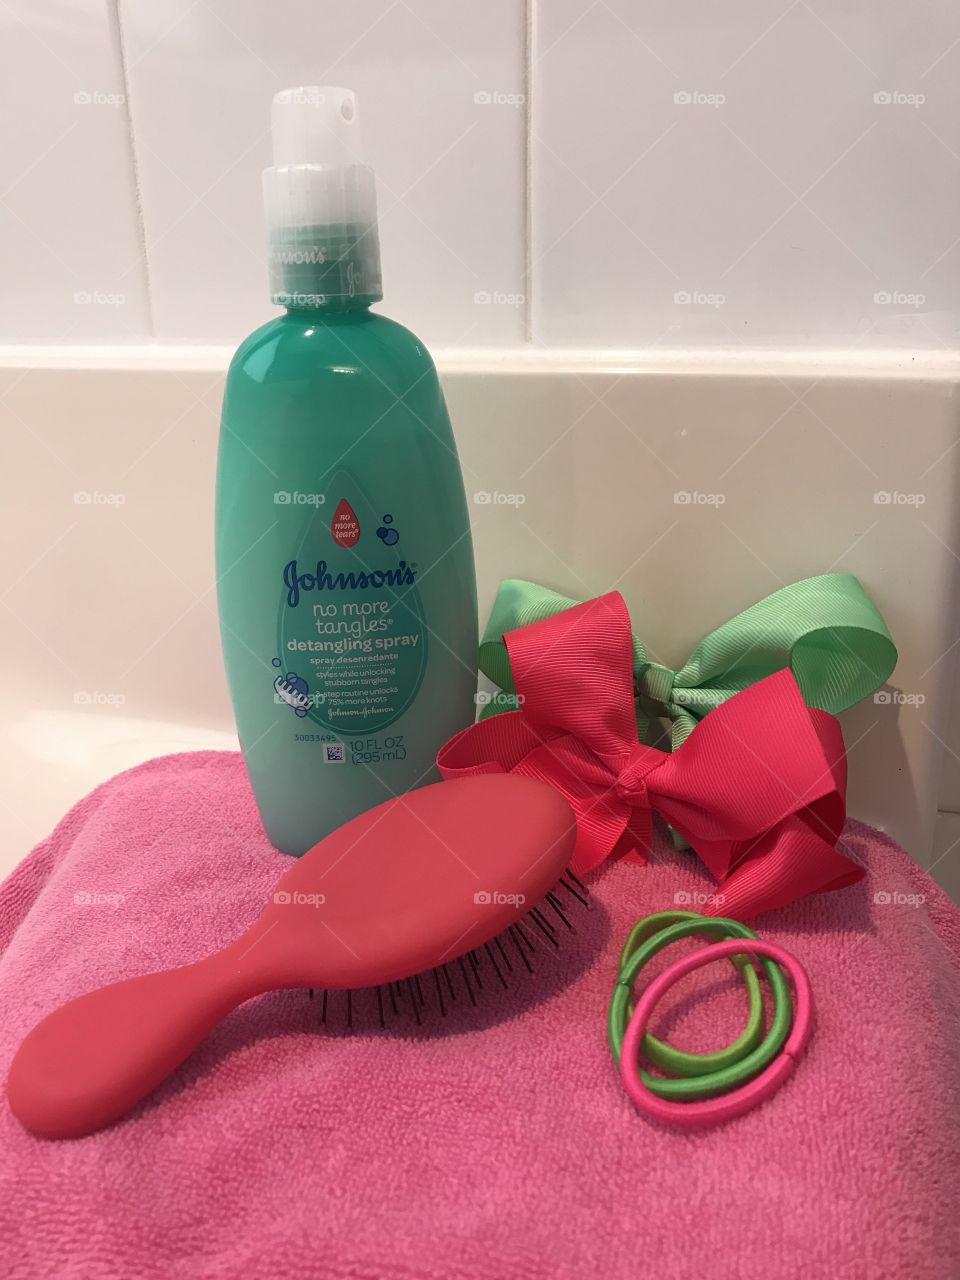 Johnson and Johnson no more tears hair product with ribbons and a hairbrush. 